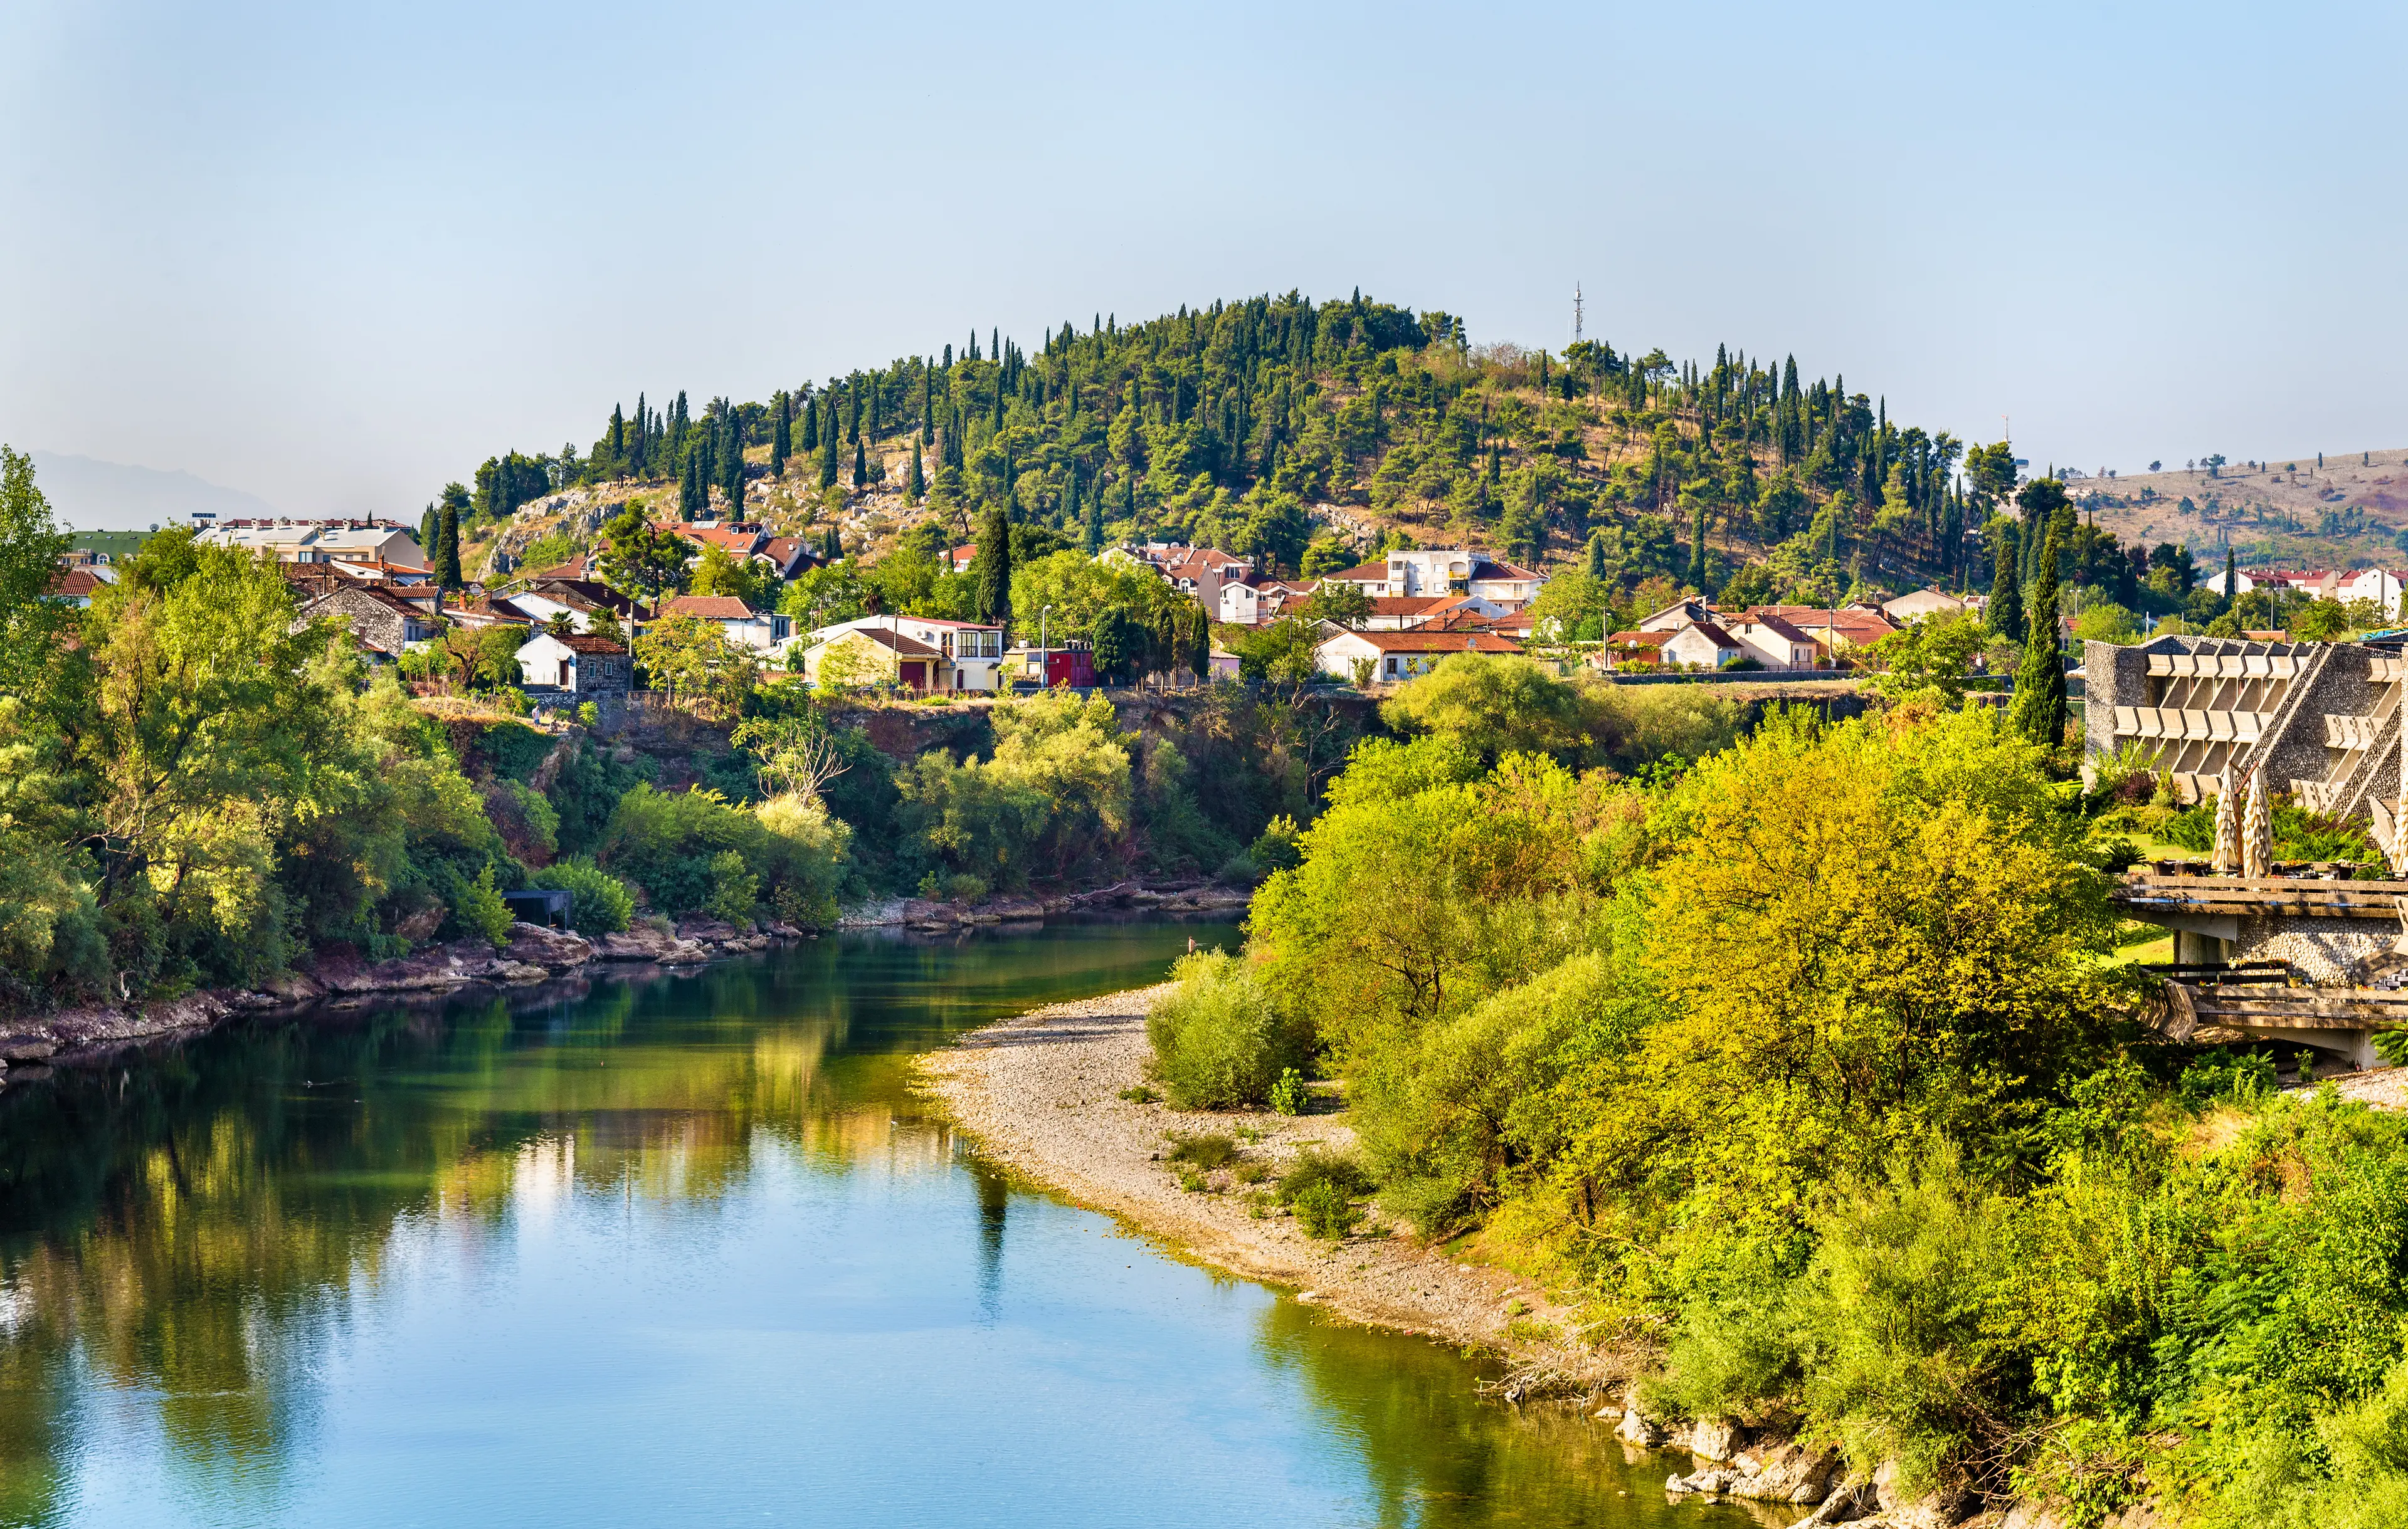 2-Day Exquisite Tour Guide to Podgorica, Montenegro